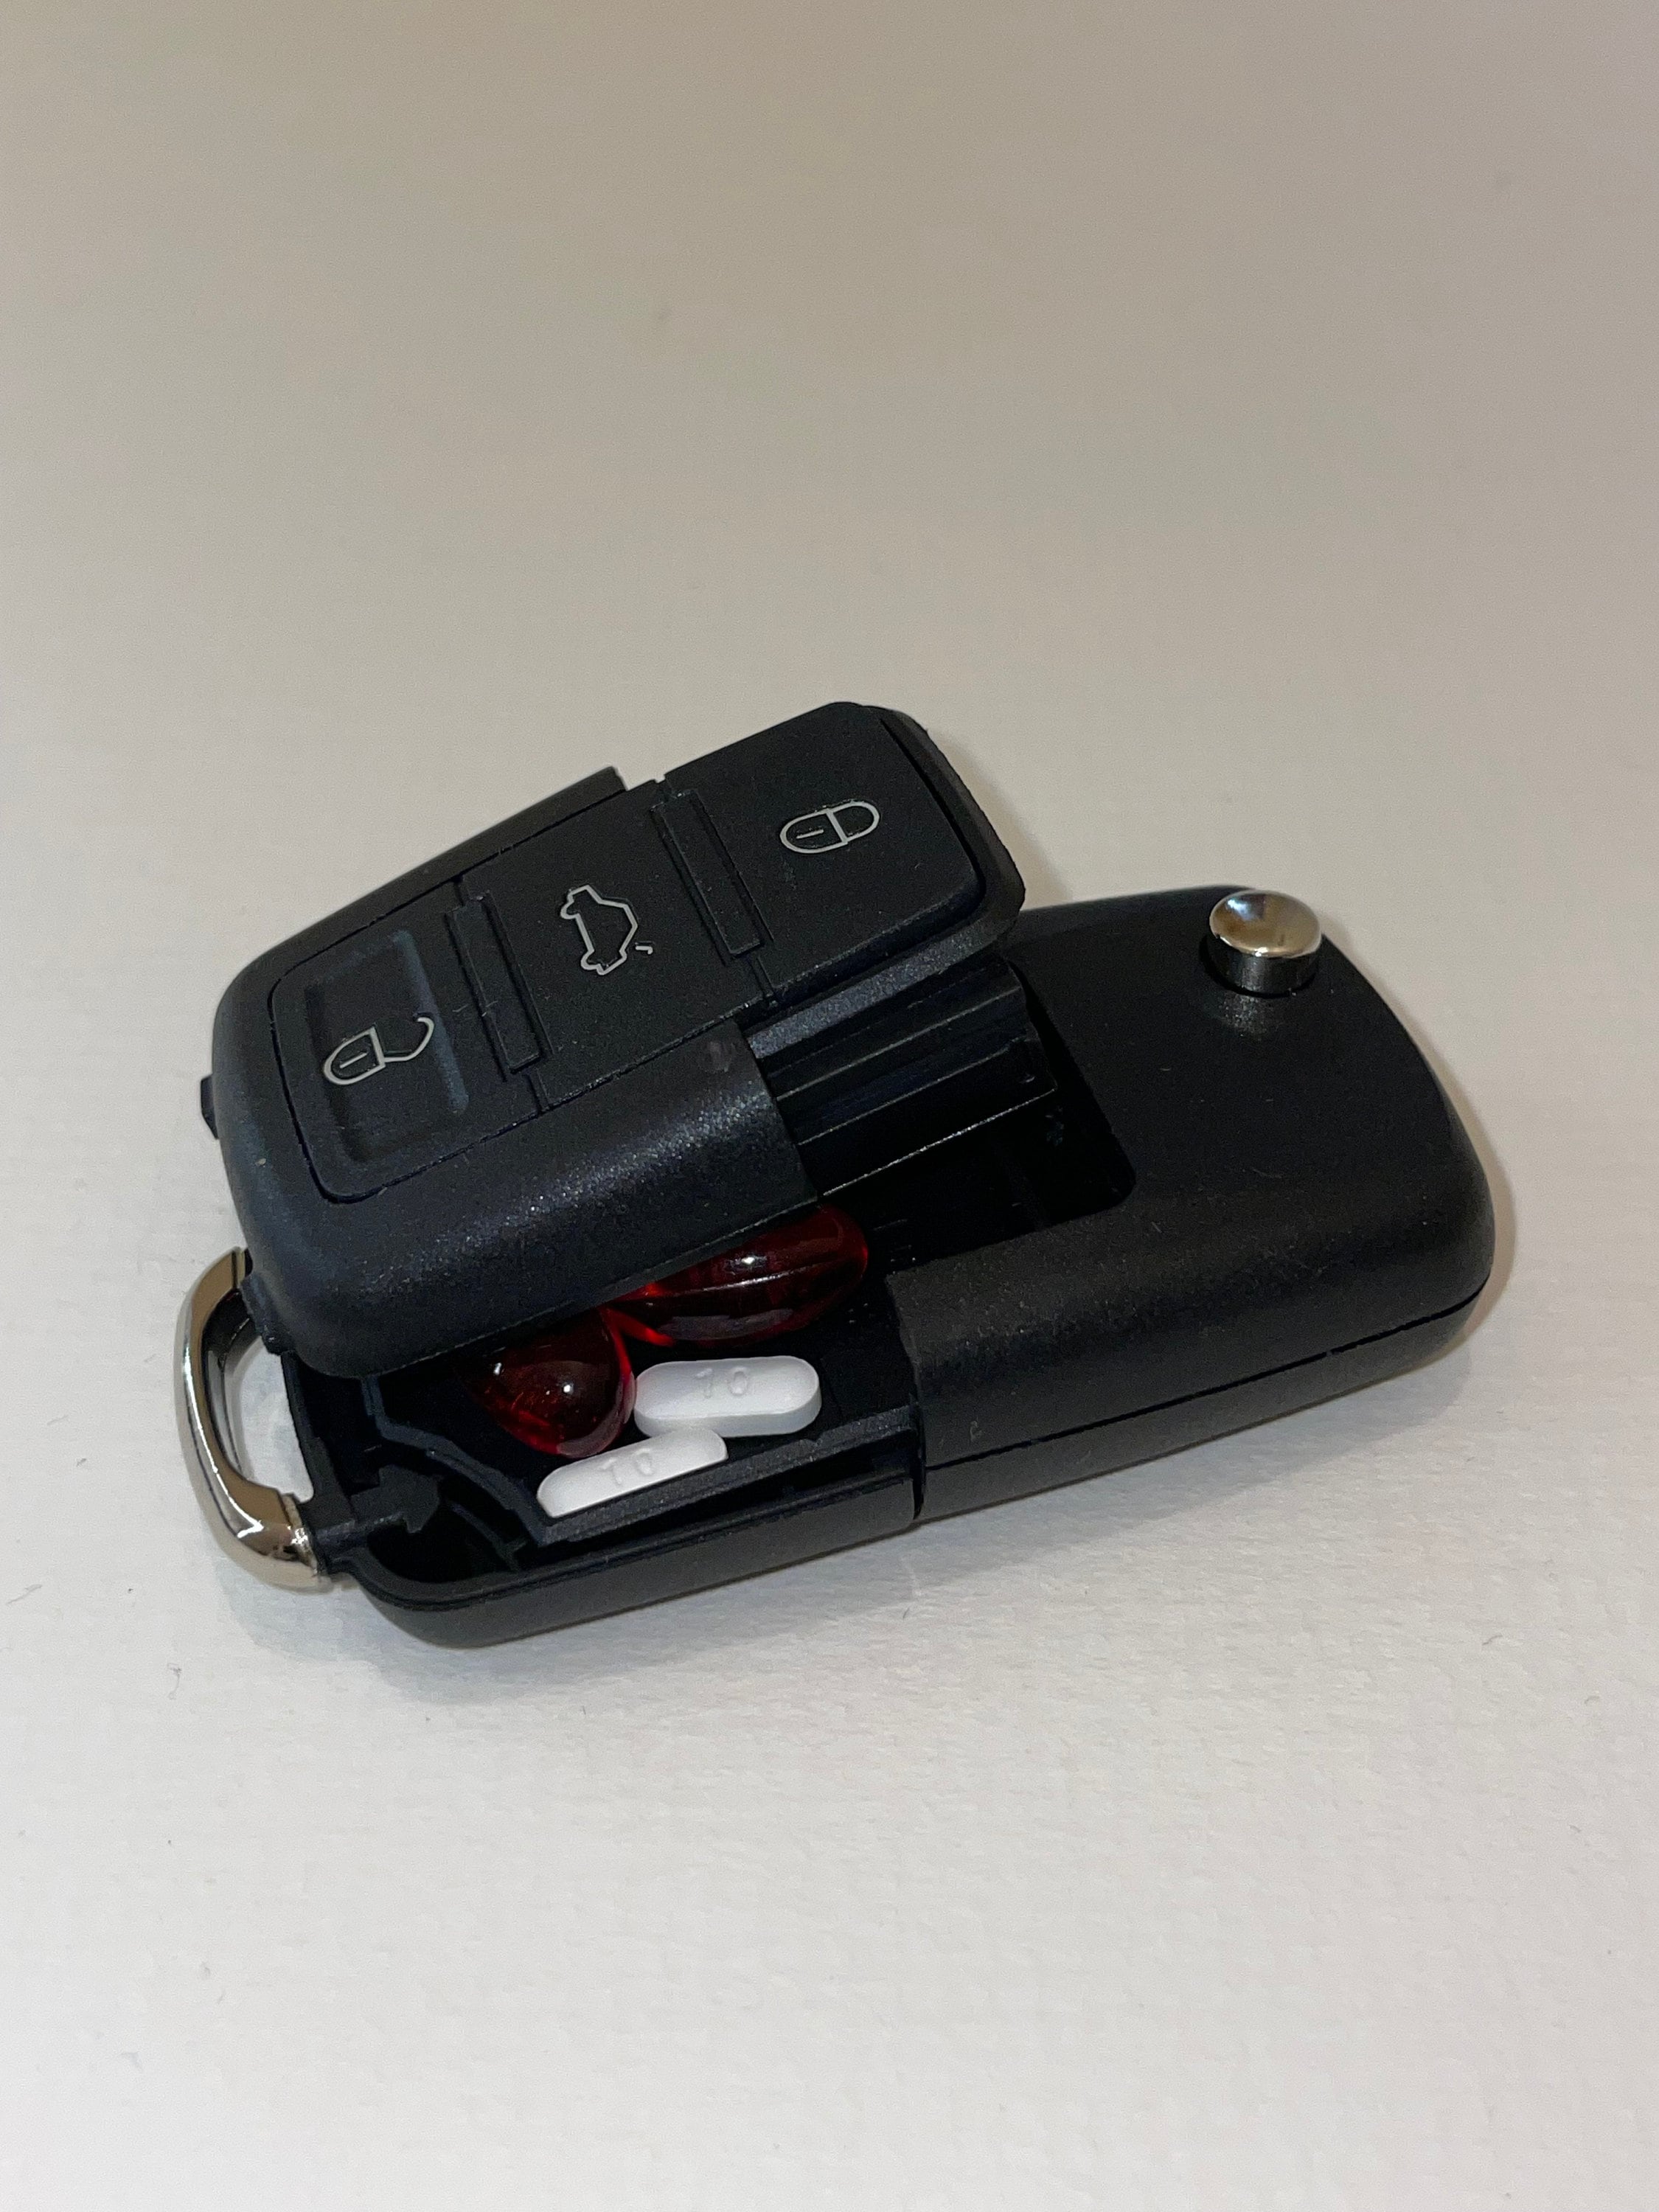 Fake Car Key Diversion Safe - Hidden Secret Compartment Stash it Box  Discreet Decoy Car Key Fob to Hide Store Money, Jewelry Small Container to  Keep Valuables Safe in Plain Sight Storage